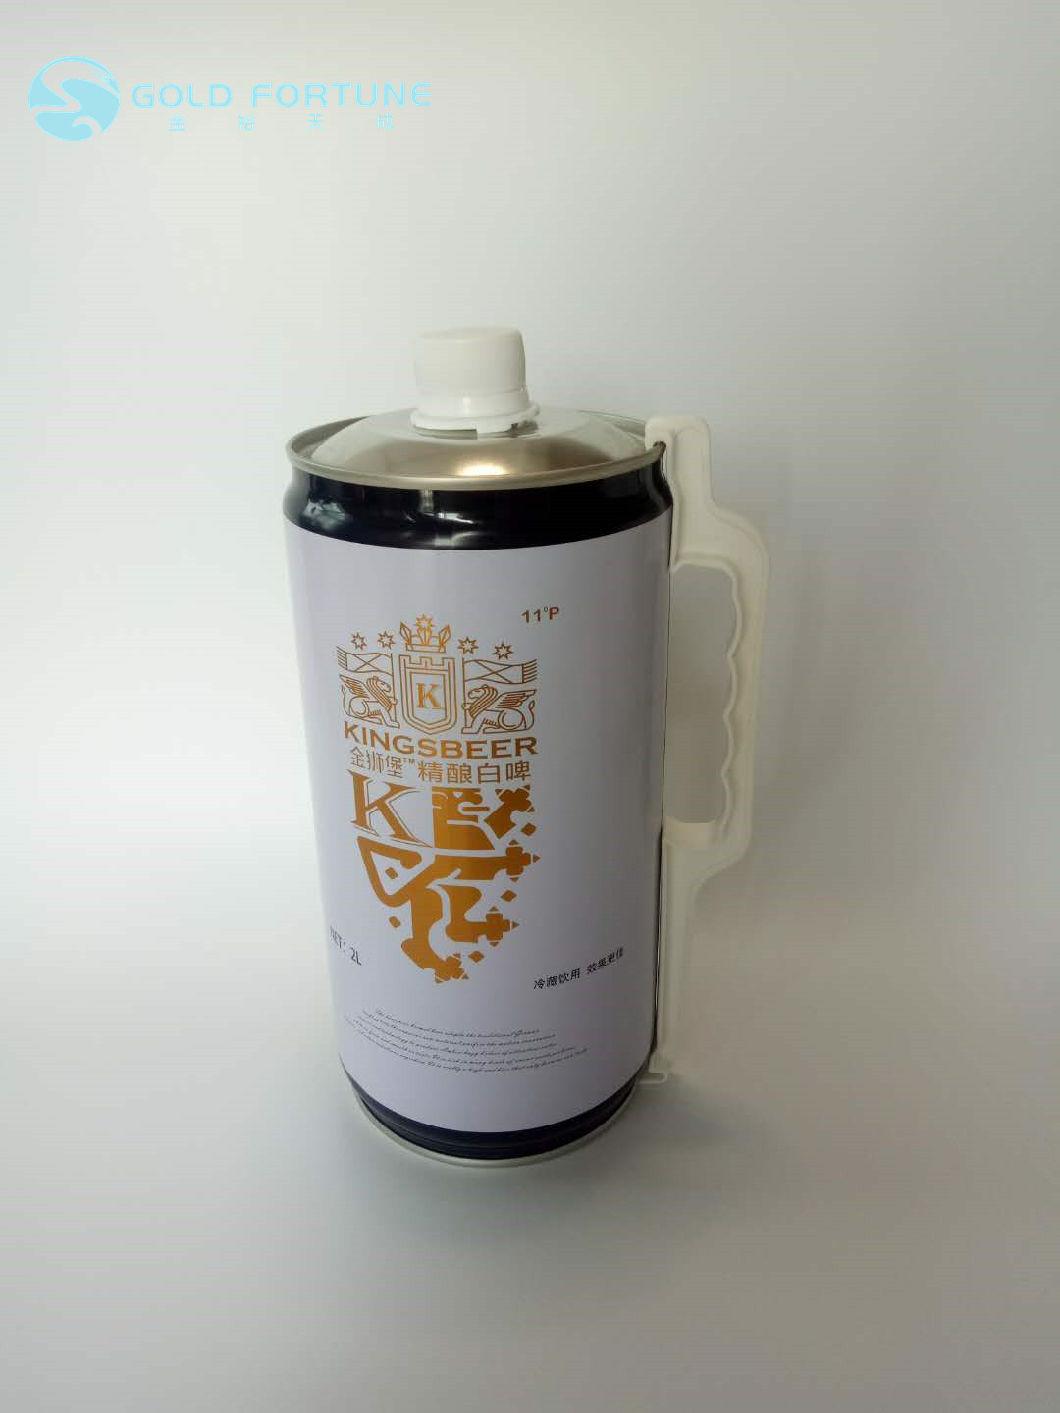 Tinplate Can Large Capacity Beer Can with Plastic Handle and Cap